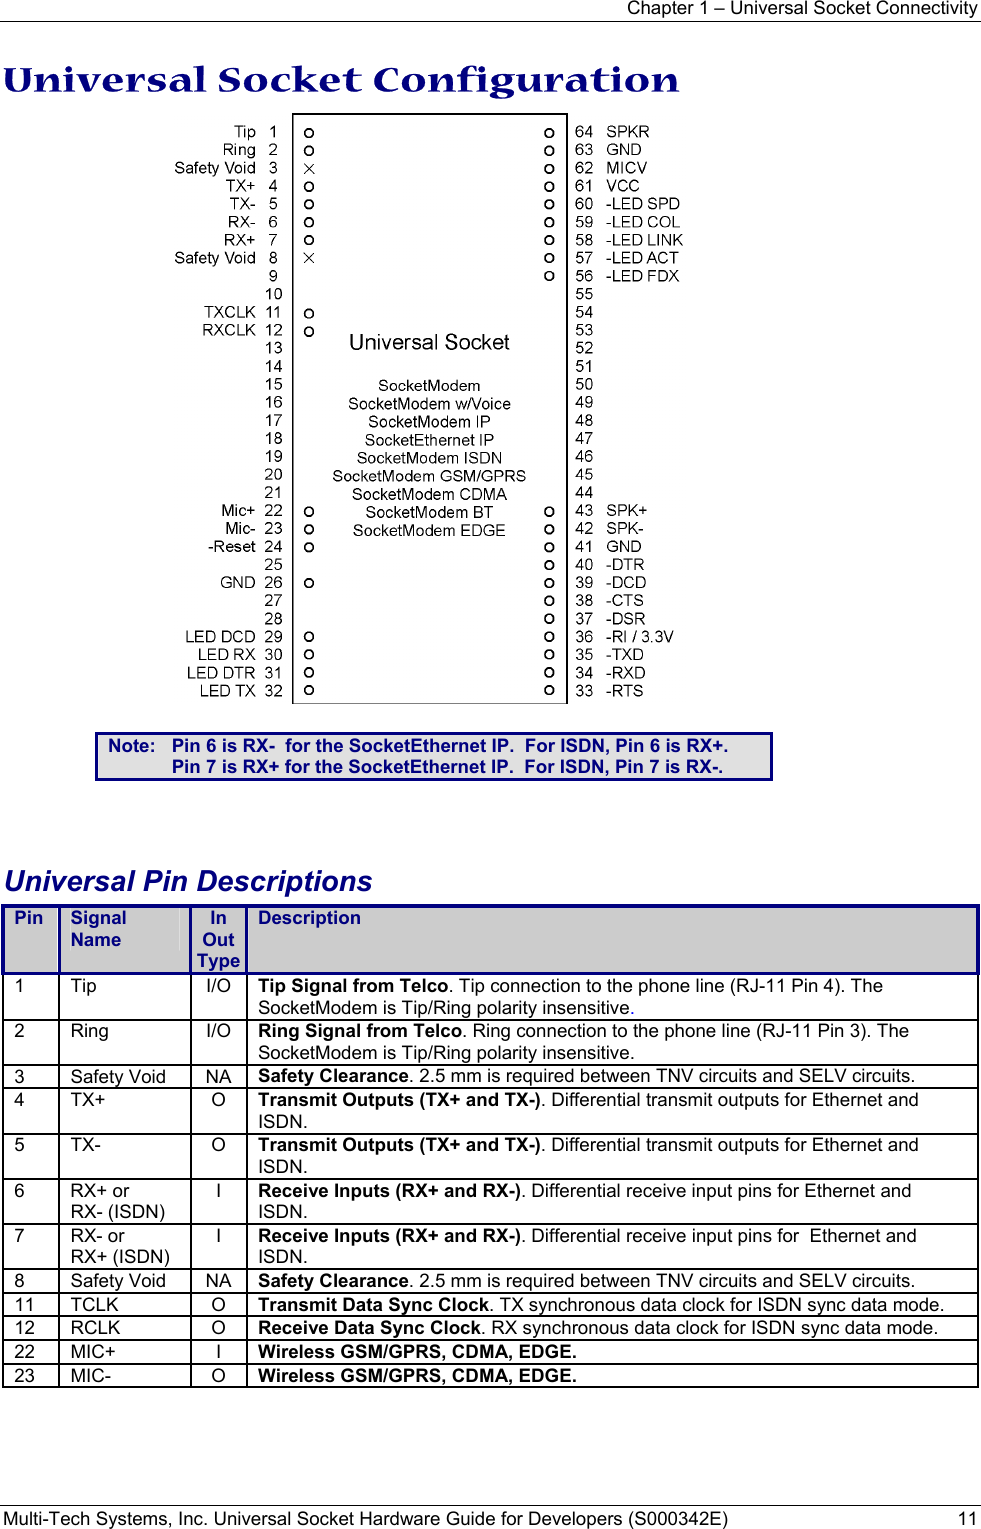 Chapter 1 – Universal Socket Connectivity Multi-Tech Systems, Inc. Universal Socket Hardware Guide for Developers (S000342E)  11  Universal Socket Configuration   Note:   Pin 6 is RX-  for the SocketEthernet IP.  For ISDN, Pin 6 is RX+. Pin 7 is RX+ for the SocketEthernet IP.  For ISDN, Pin 7 is RX-.    Universal Pin Descriptions Pin  Signal Name In  Out Type Description 1 Tip  I/O Tip Signal from Telco. Tip connection to the phone line (RJ-11 Pin 4). The SocketModem is Tip/Ring polarity insensitive. 2 Ring  I/O Ring Signal from Telco. Ring connection to the phone line (RJ-11 Pin 3). The SocketModem is Tip/Ring polarity insensitive. 3 Safety Void NA Safety Clearance. 2.5 mm is required between TNV circuits and SELV circuits. 4 TX+  O Transmit Outputs (TX+ and TX-). Differential transmit outputs for Ethernet and ISDN. 5 TX-  O Transmit Outputs (TX+ and TX-). Differential transmit outputs for Ethernet and ISDN. 6 RX+ or RX- (ISDN) I  Receive Inputs (RX+ and RX-). Differential receive input pins for Ethernet and ISDN. 7 RX- or RX+ (ISDN) I  Receive Inputs (RX+ and RX-). Differential receive input pins for  Ethernet and ISDN. 8 Safety Void NA Safety Clearance. 2.5 mm is required between TNV circuits and SELV circuits. 11 TCLK  O Transmit Data Sync Clock. TX synchronous data clock for ISDN sync data mode. 12 RCLK  O Receive Data Sync Clock. RX synchronous data clock for ISDN sync data mode. 22 MIC+  I Wireless GSM/GPRS, CDMA, EDGE. 23 MIC-  O Wireless GSM/GPRS, CDMA, EDGE. 